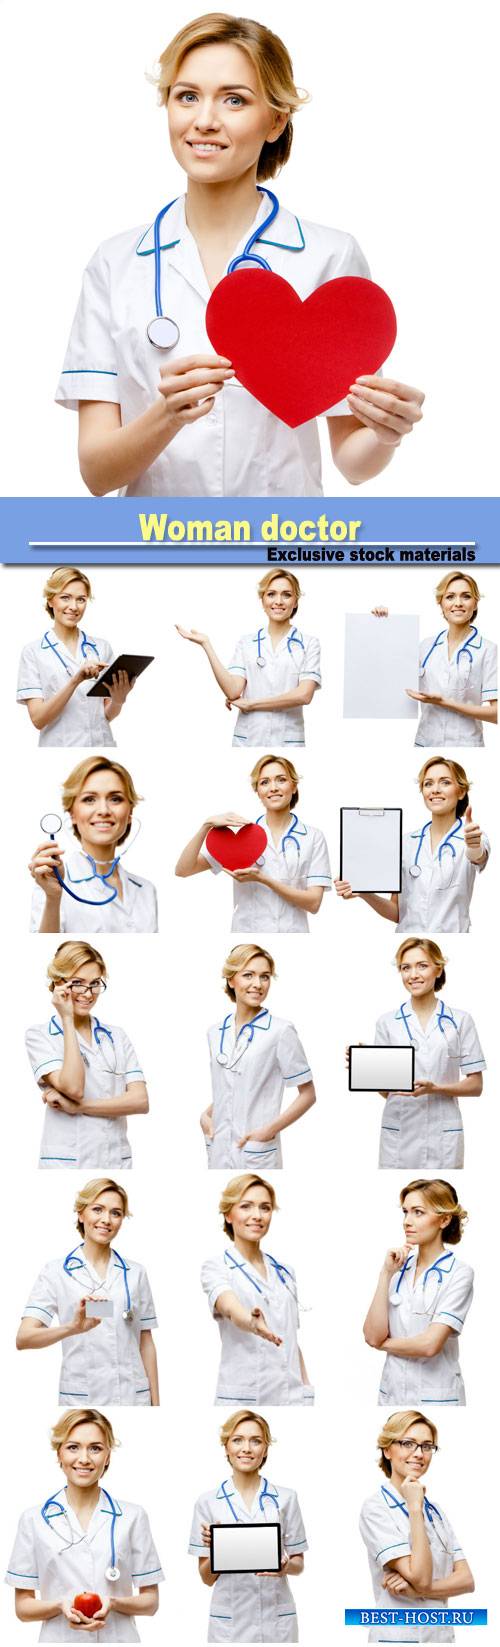 Woman doctor standing on white background